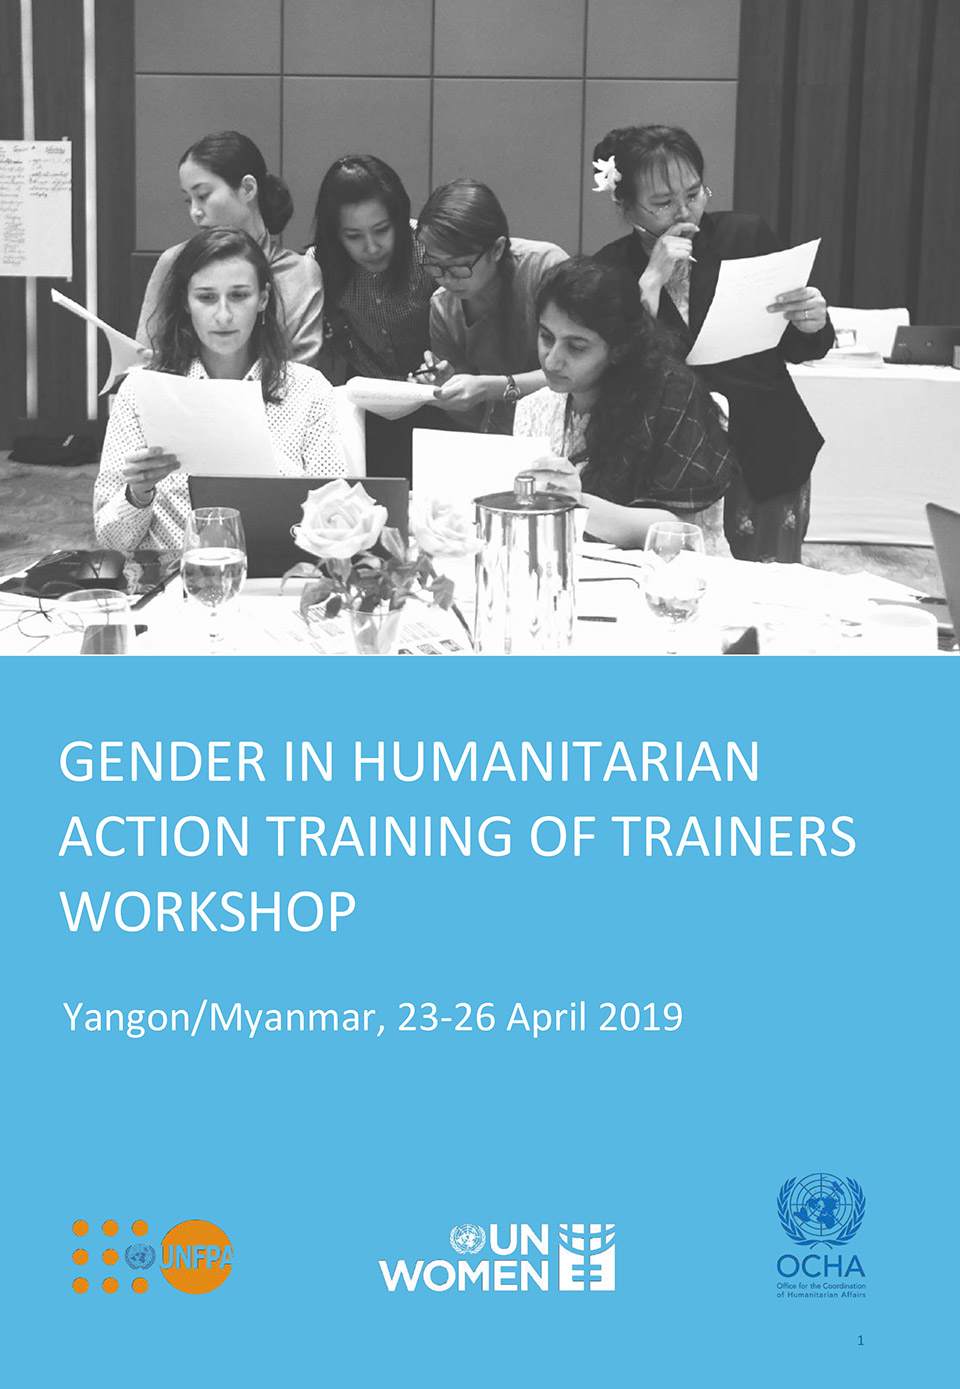 Gender in Humanitarian Action Training of Trainers Workshop